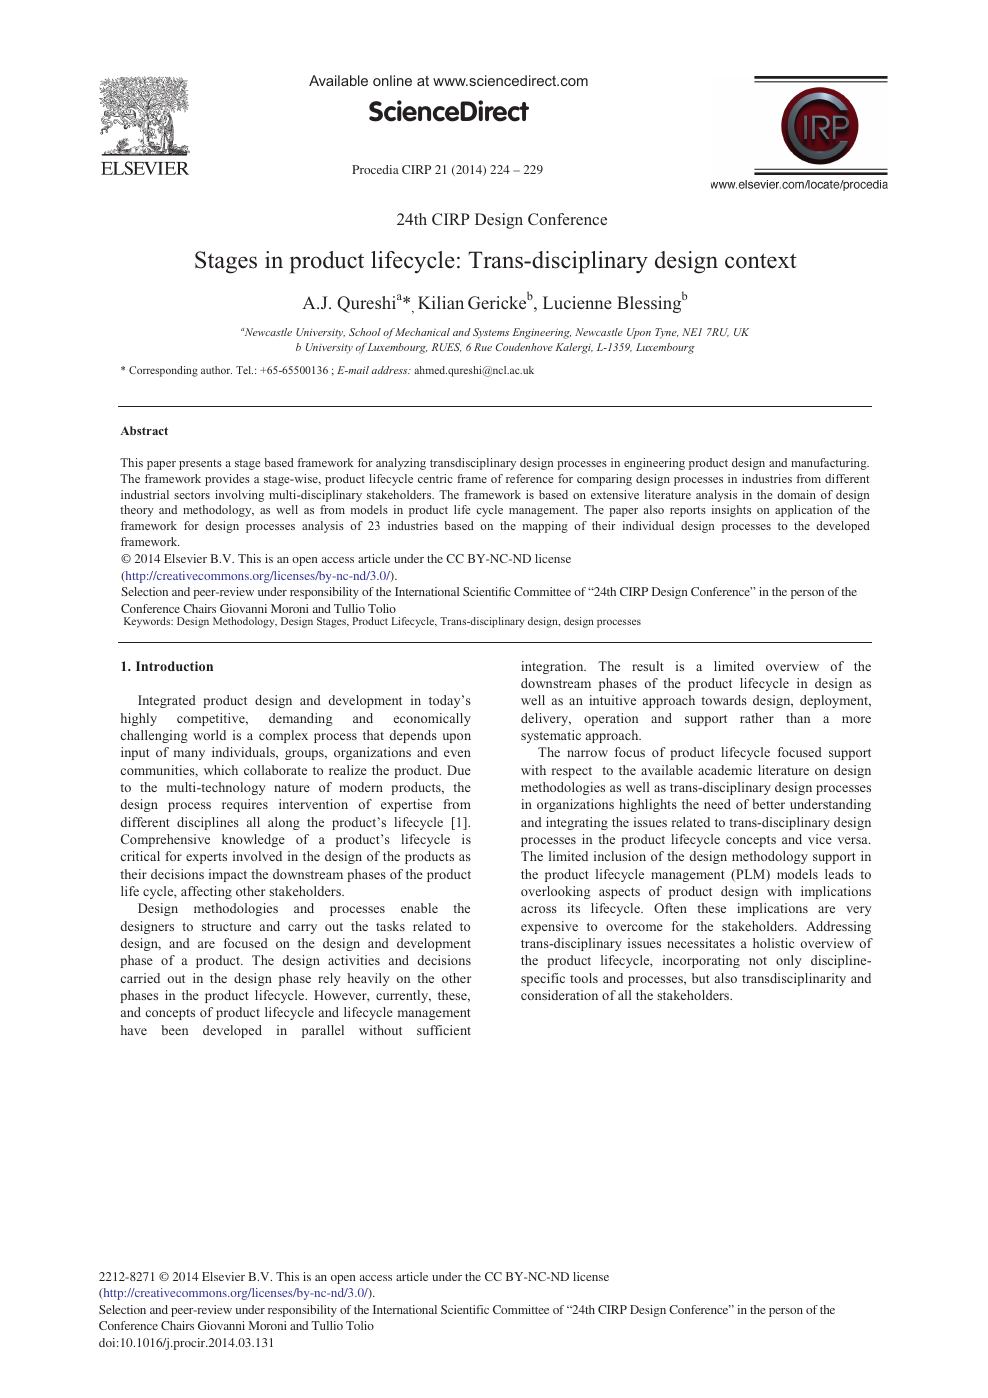 Stages In Product Lifecycle Trans Disciplinary Design Context Topic Of Research Paper In Mechanical Engineering Download Scholarly Article Pdf And Read For Free On Cyberleninka Open Science Hub